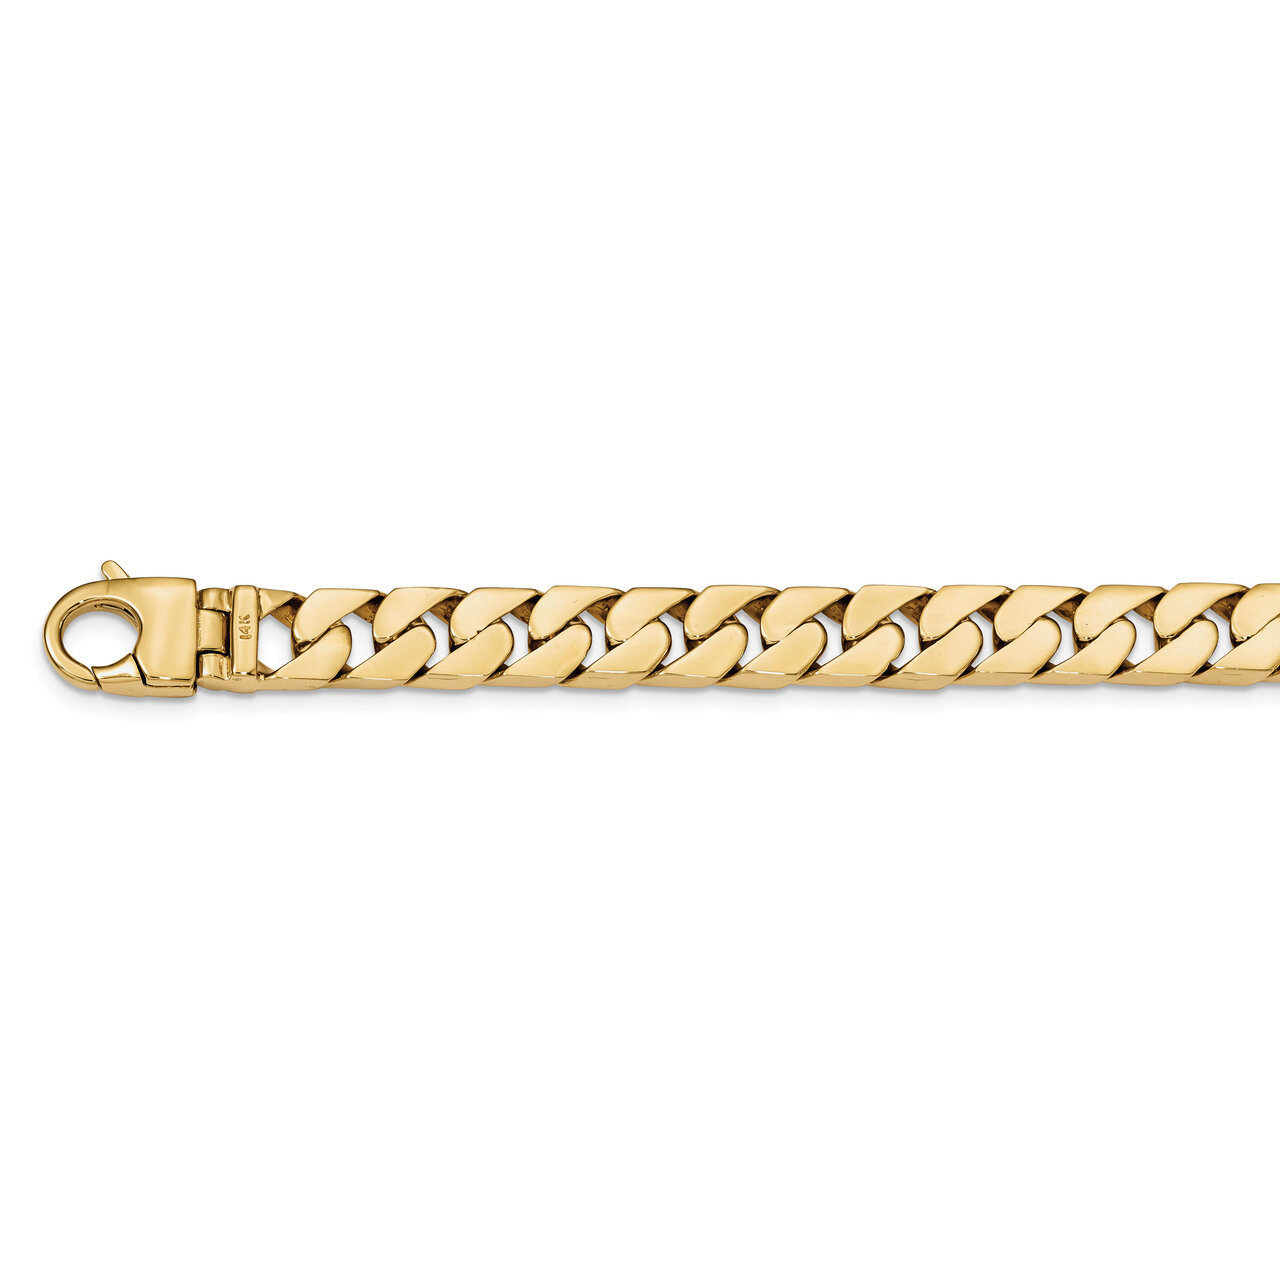 24 Inch 10.20mm Hand-polished Long Link Half Round Curb Chain 14k Gold LK590-24